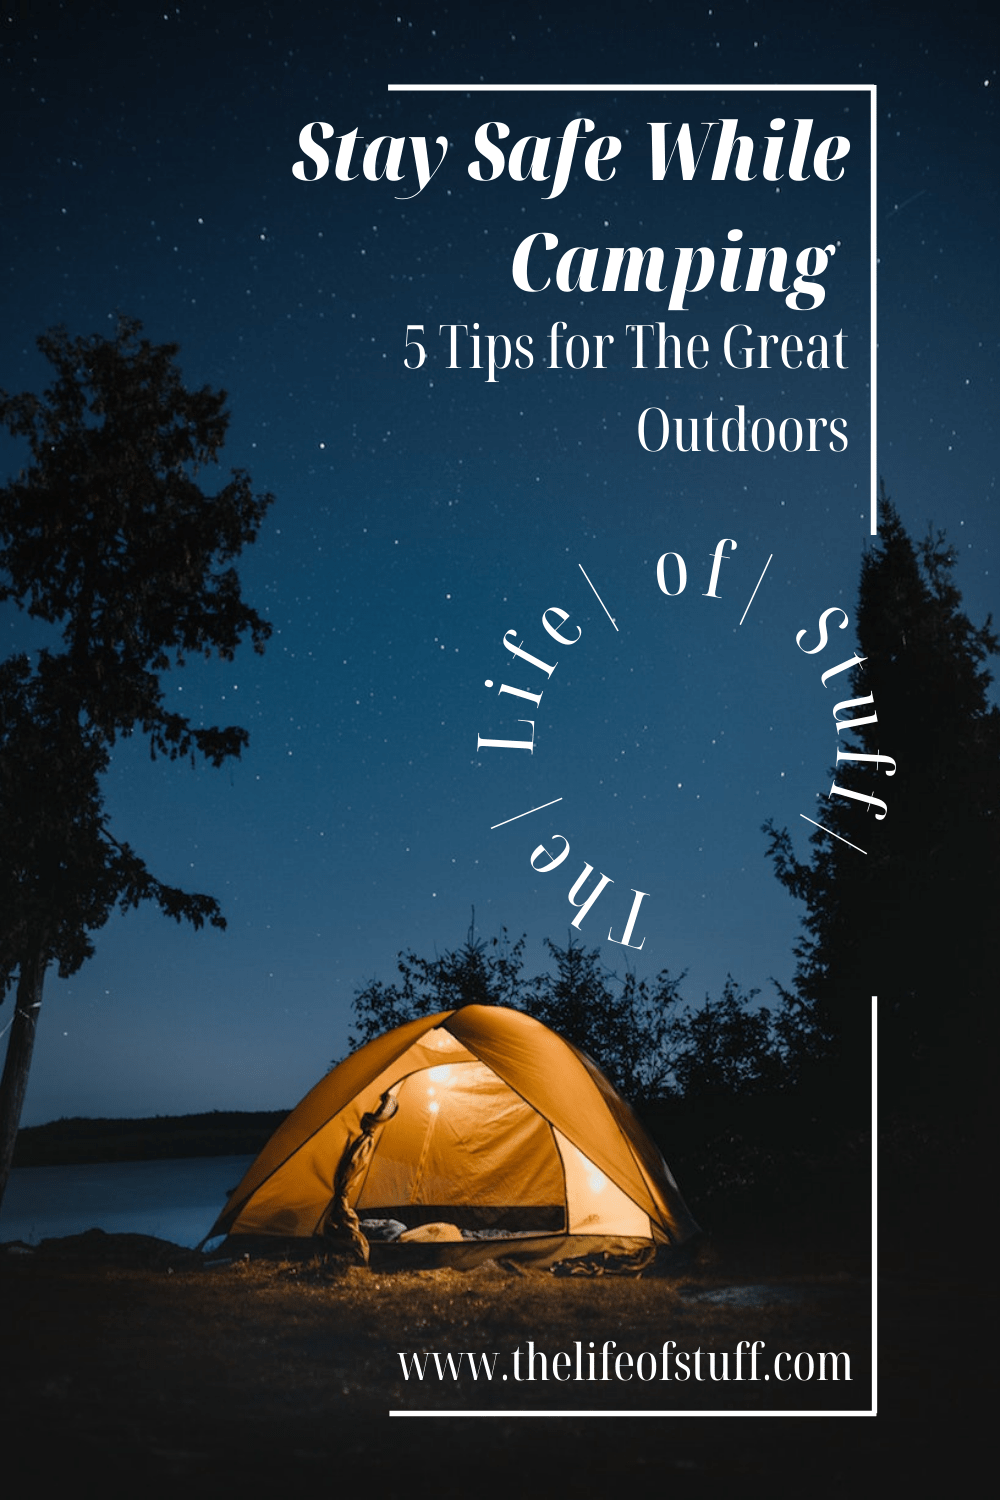 Stay Safe While Camping - 5 Tips for The Great Outdoors - The Life of Stuff